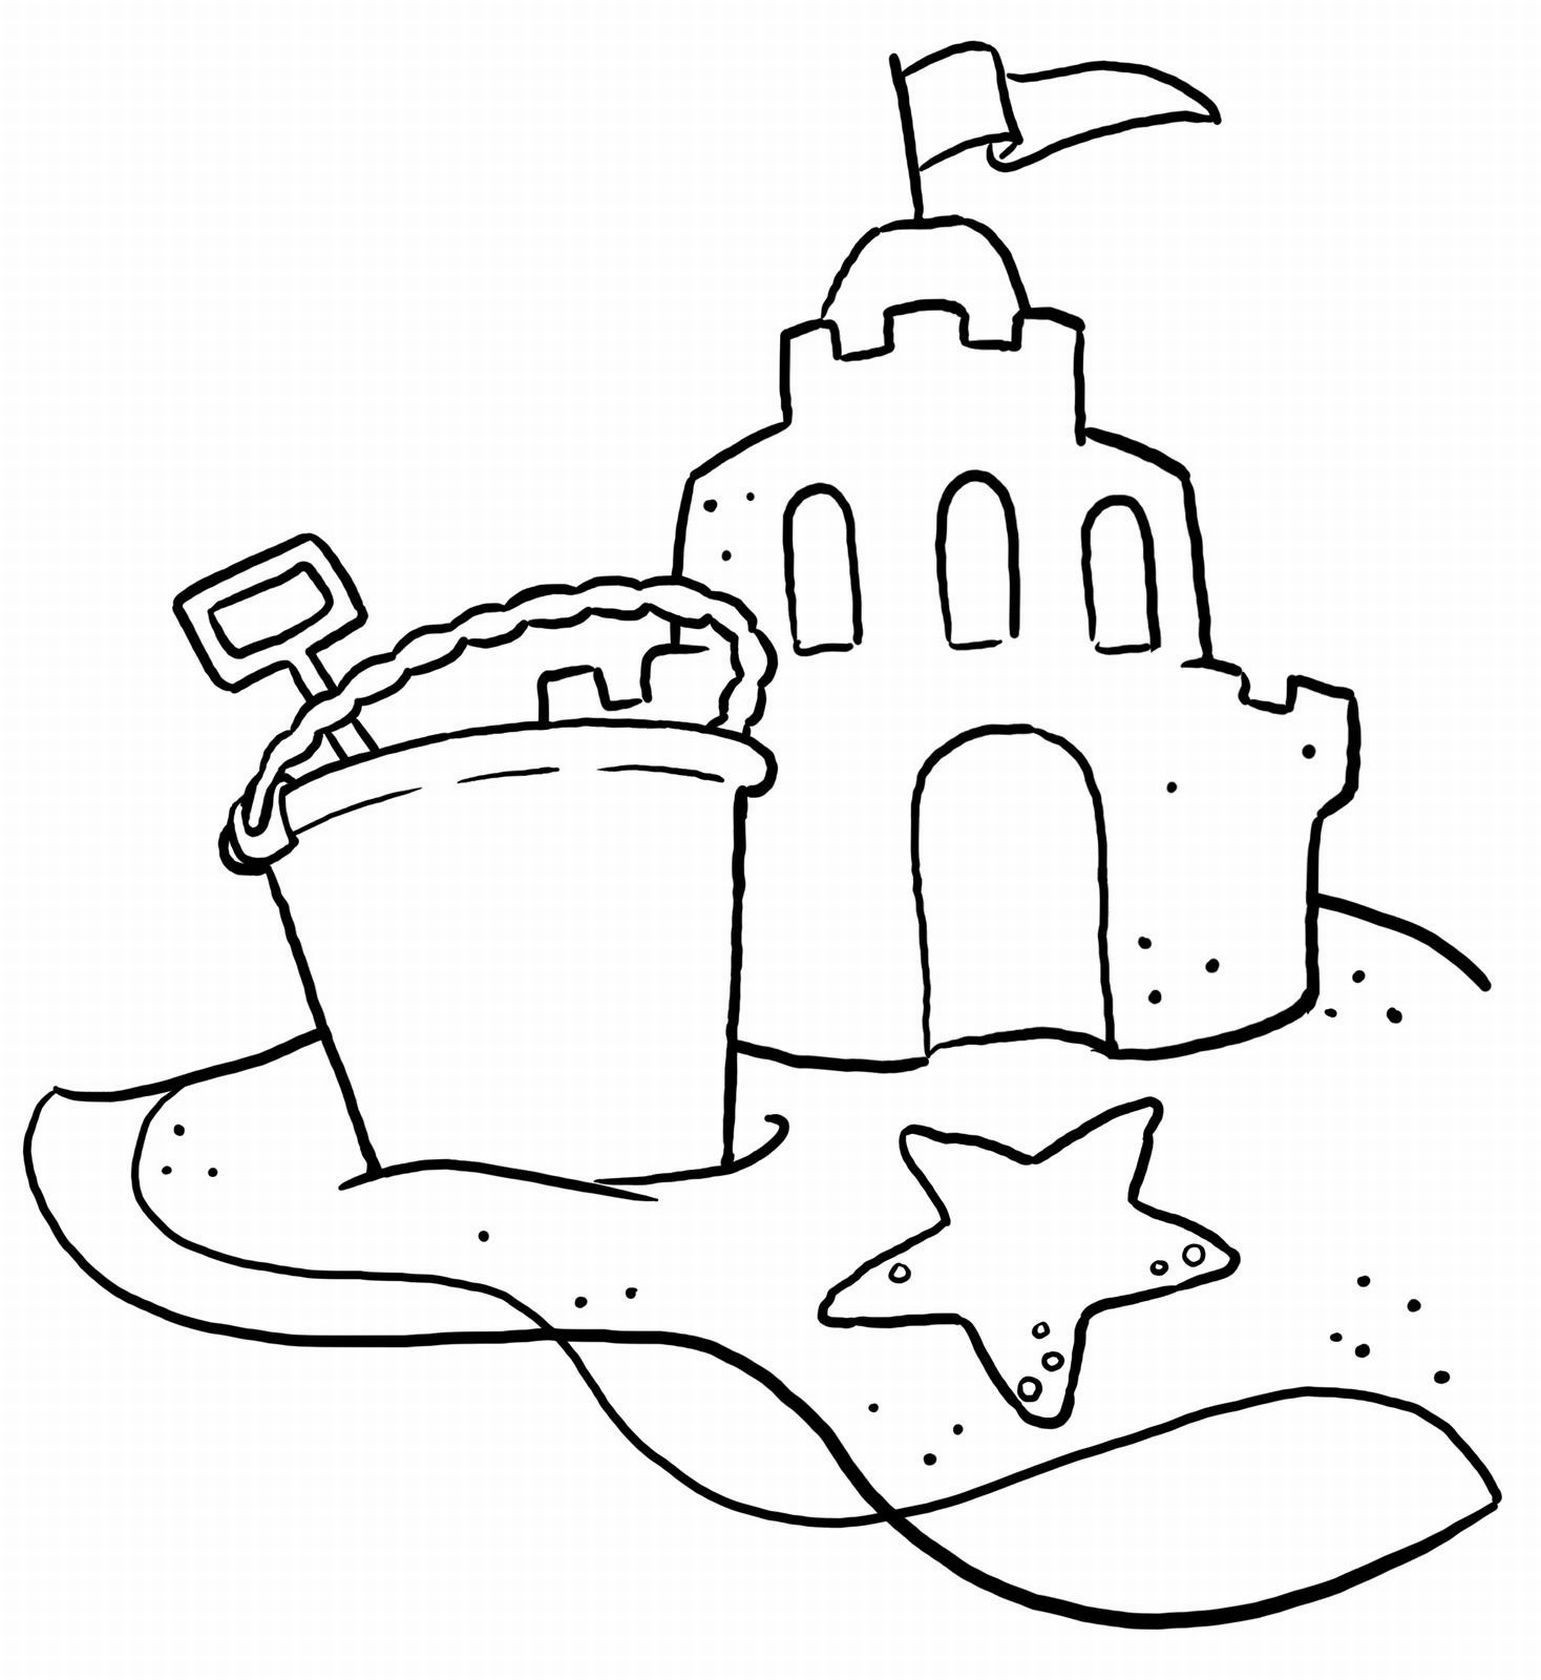 Beach Printable Coloring Pages
 Beach Coloring Pages 20 Free Printable Sheets to Color